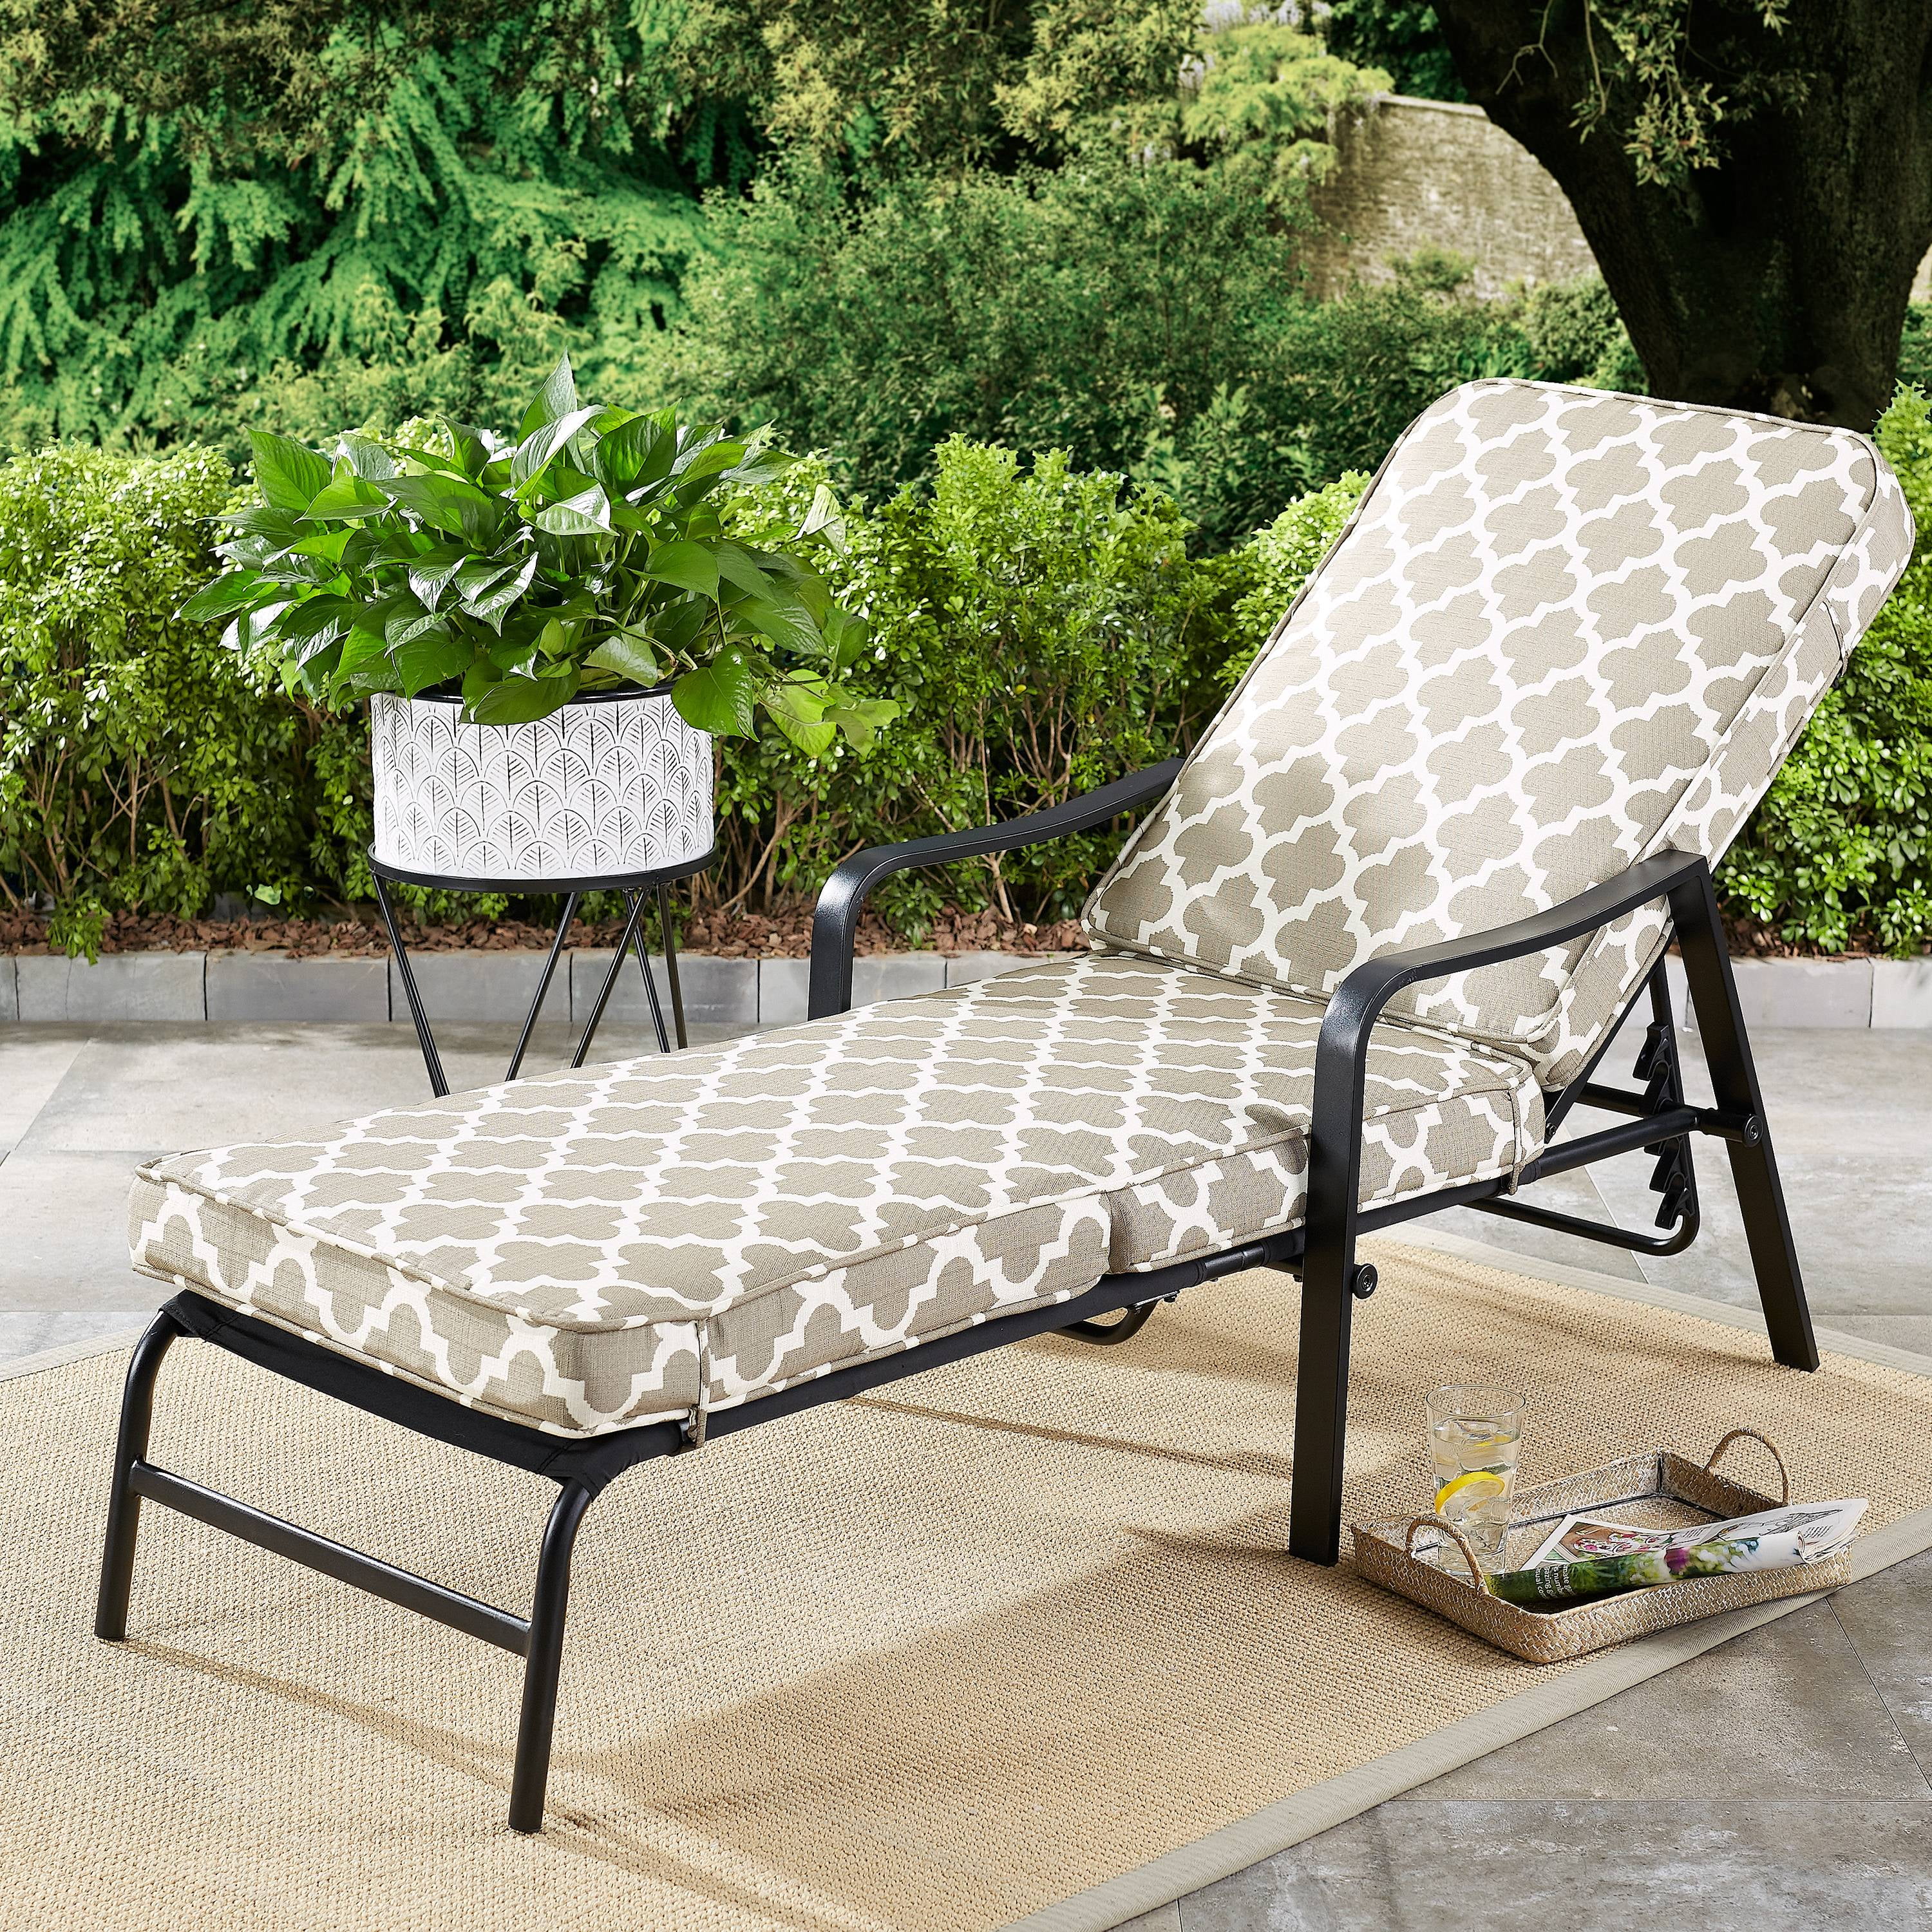 White Chaise Lounge Outdoors